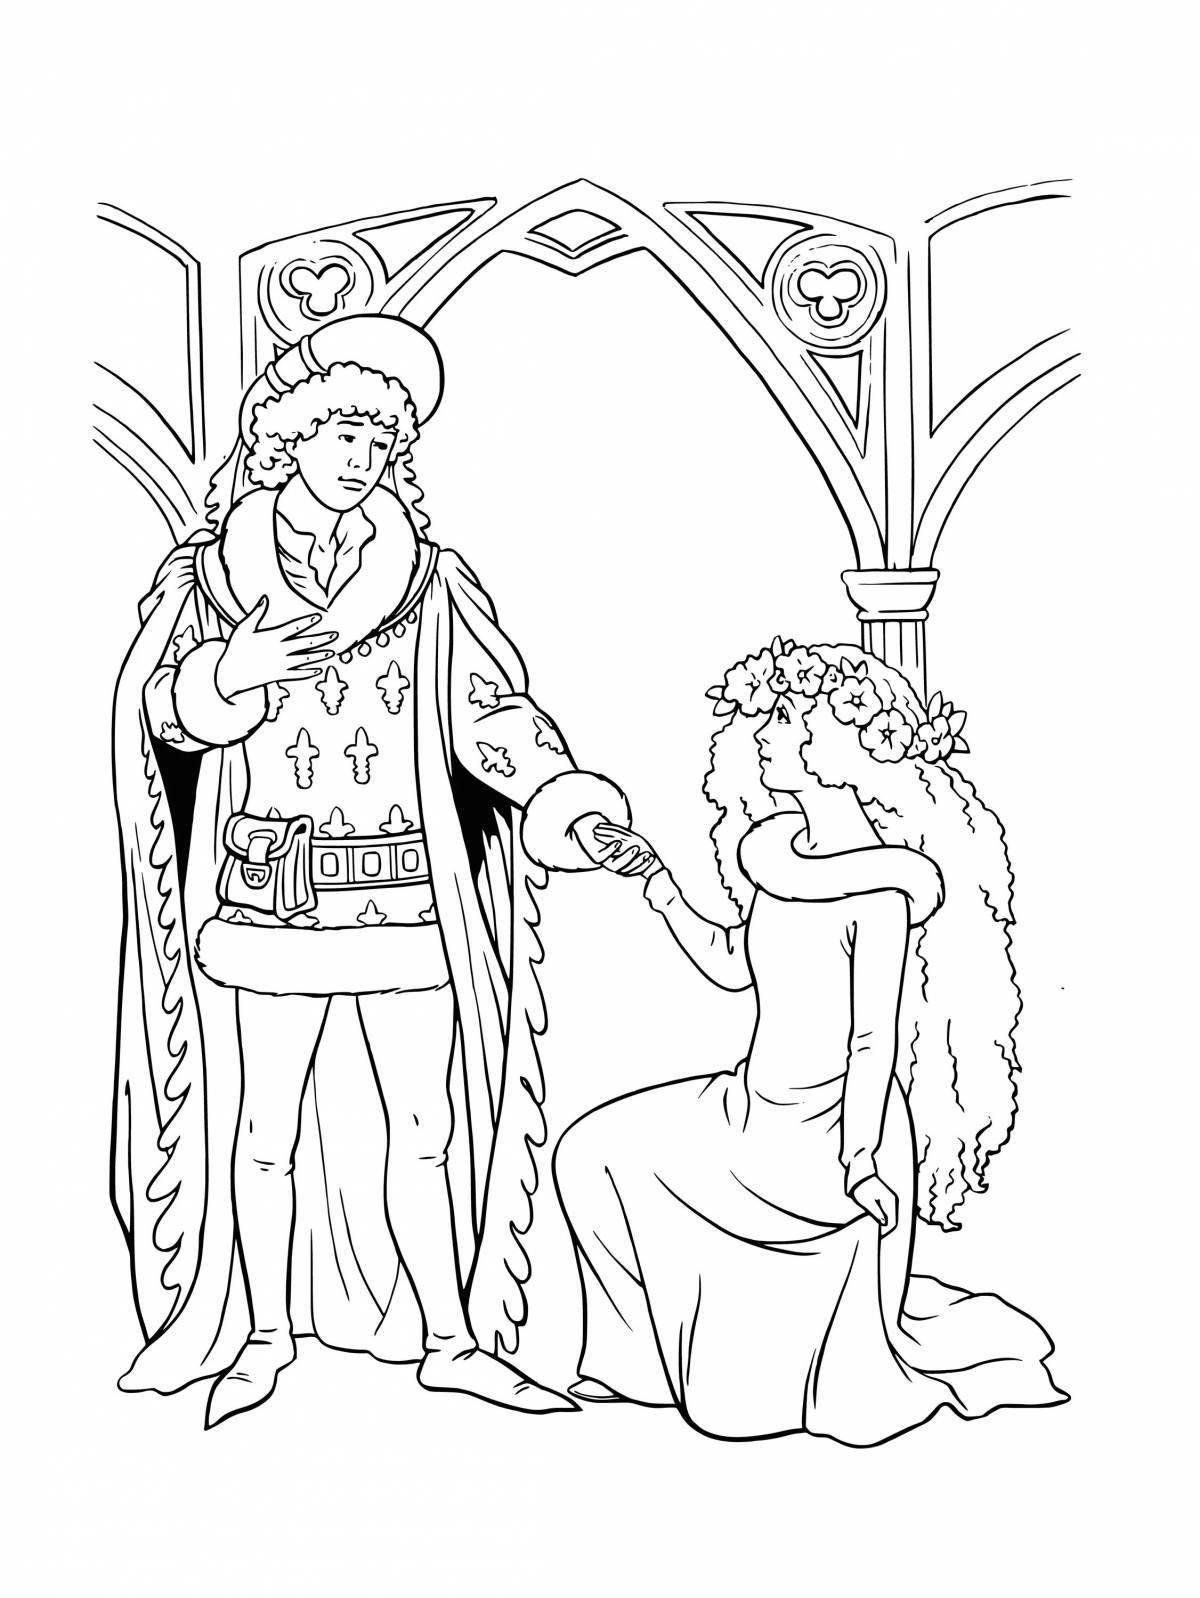 Exquisite king and queen coloring book